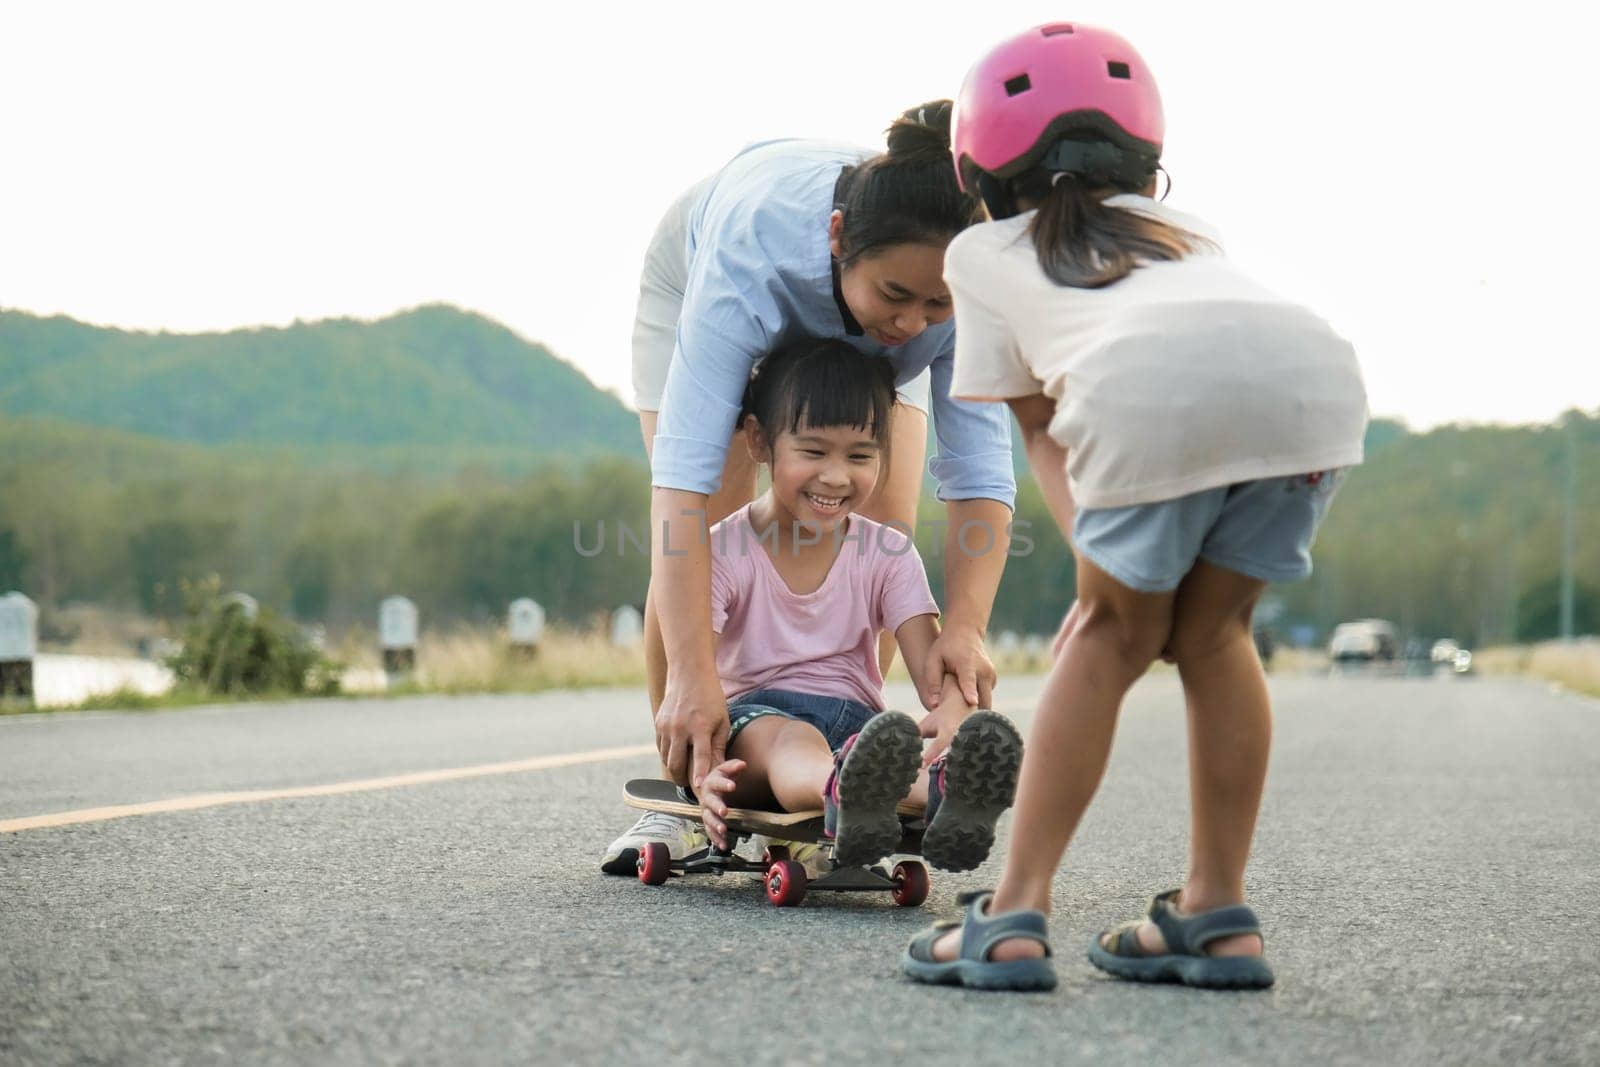 Mother teaching her daughter how to skateboard in the park. Child riding skate board. Healthy sports and outdoor activities for school children in the summer. by TEERASAK